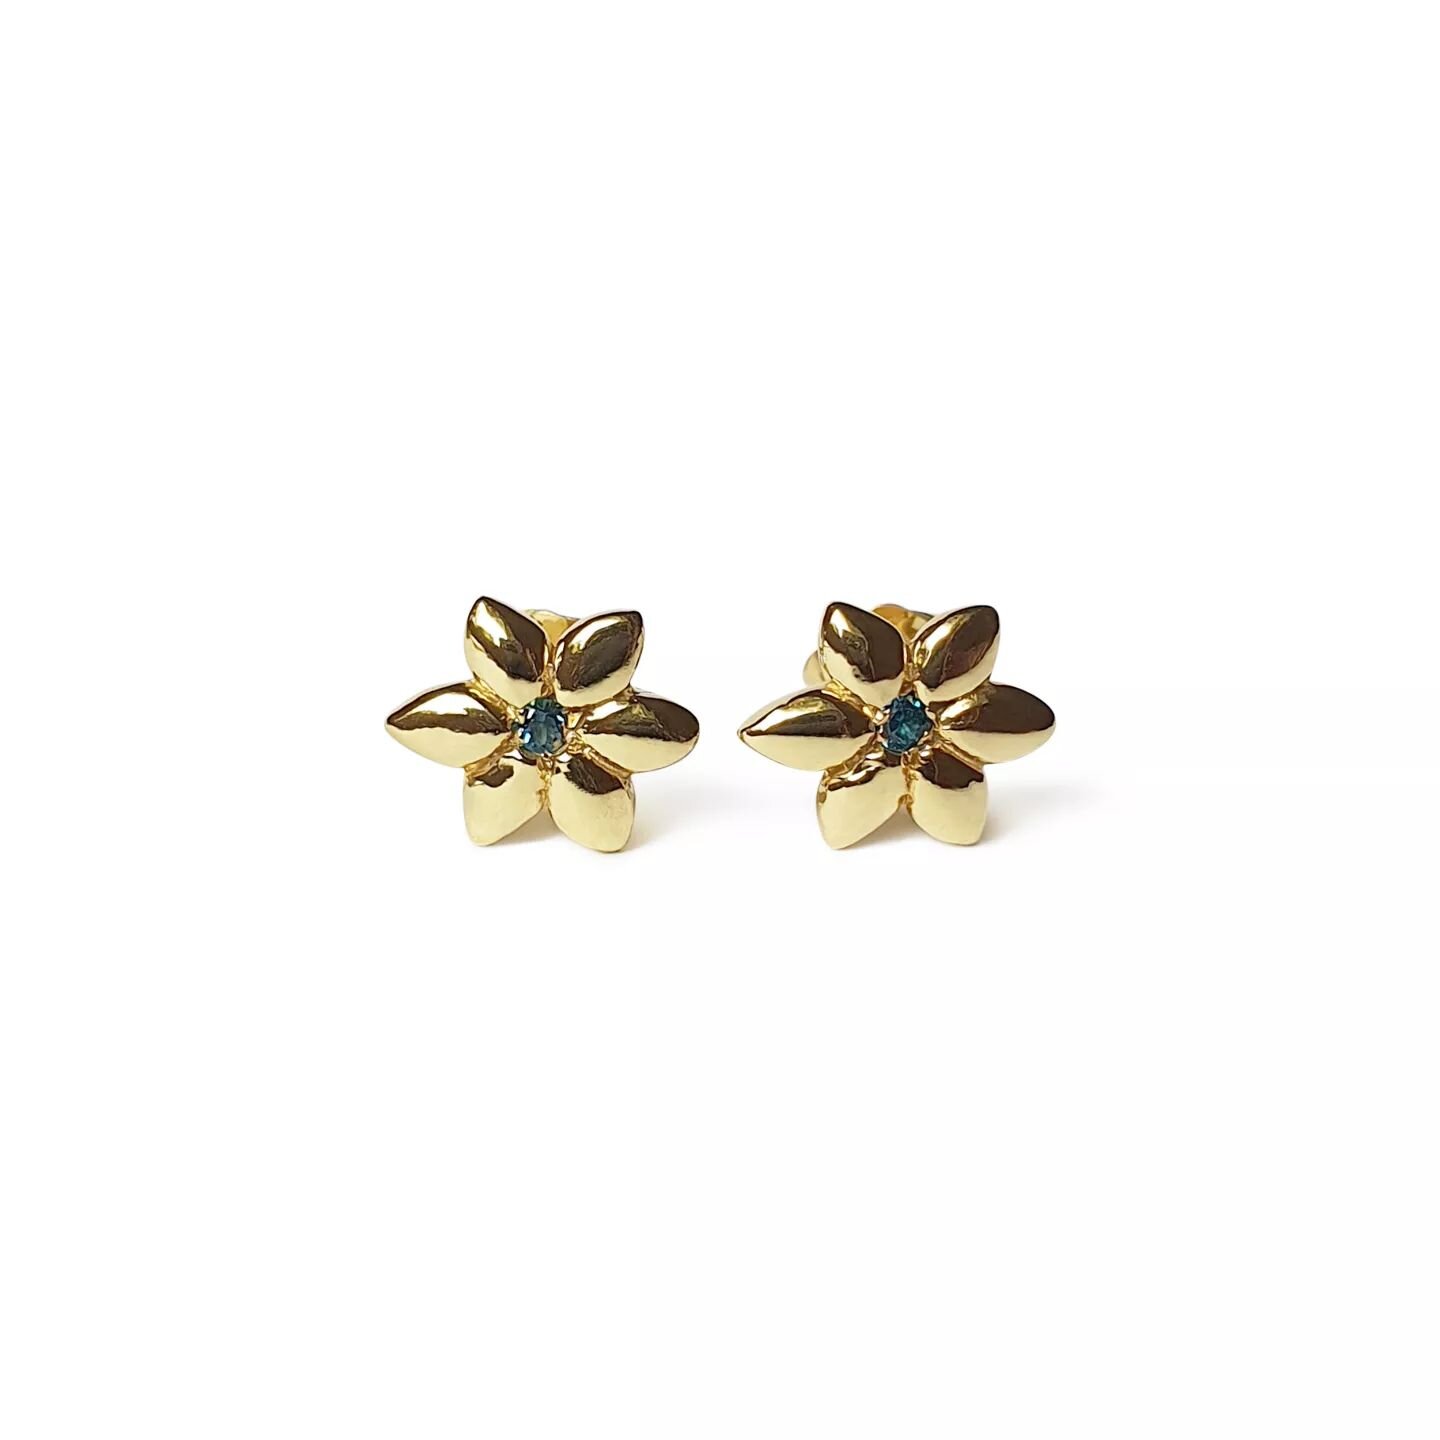 Loving these new gold flower studs!
🌸💎🌸

STAR FLOWERS
studs, with teal tourmaline

Birthstones and selected gems available too! 

#18ctgold #14ctgold #9ctgold #starsign #gold #bling #jewelry #floral #earringsofinstagram #birthstones #starsigns #go